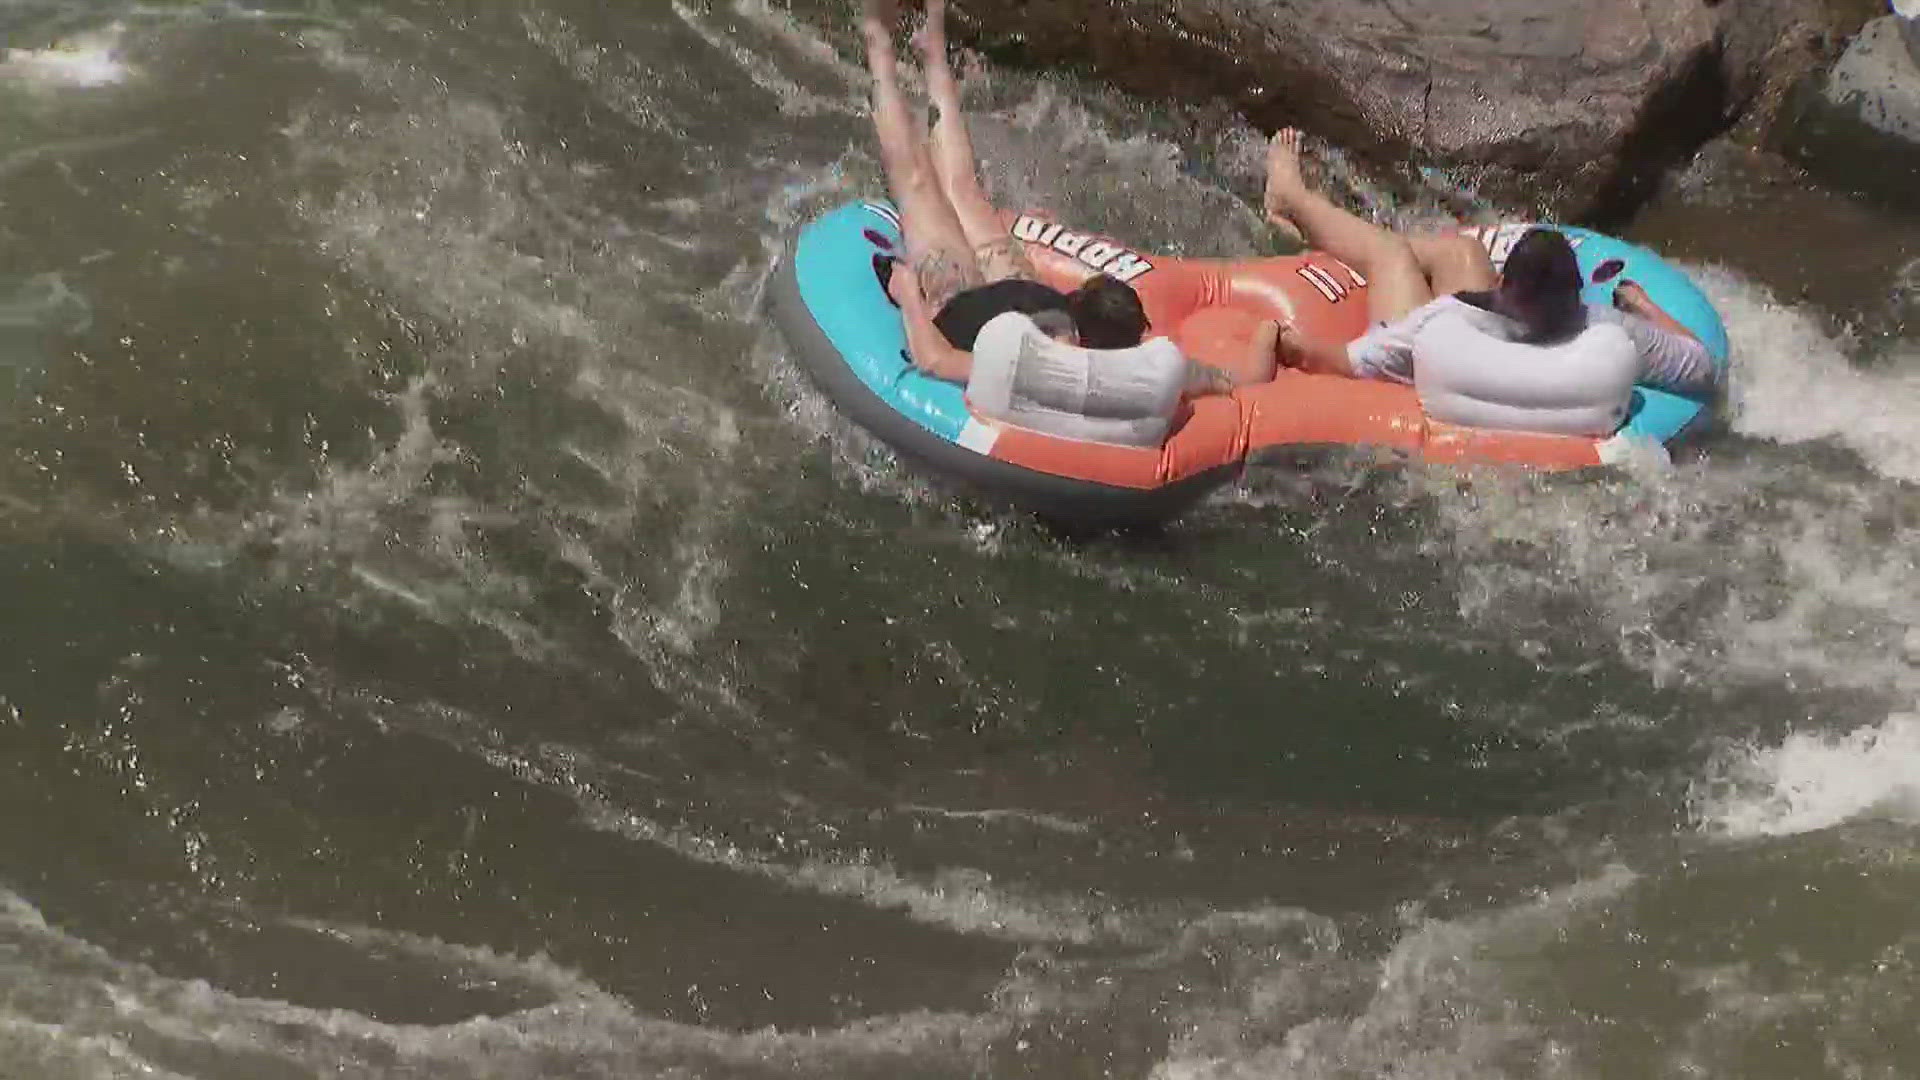 First responders say people recreating on Colorado's waterways need to wear personal floatation devices or life jackets.